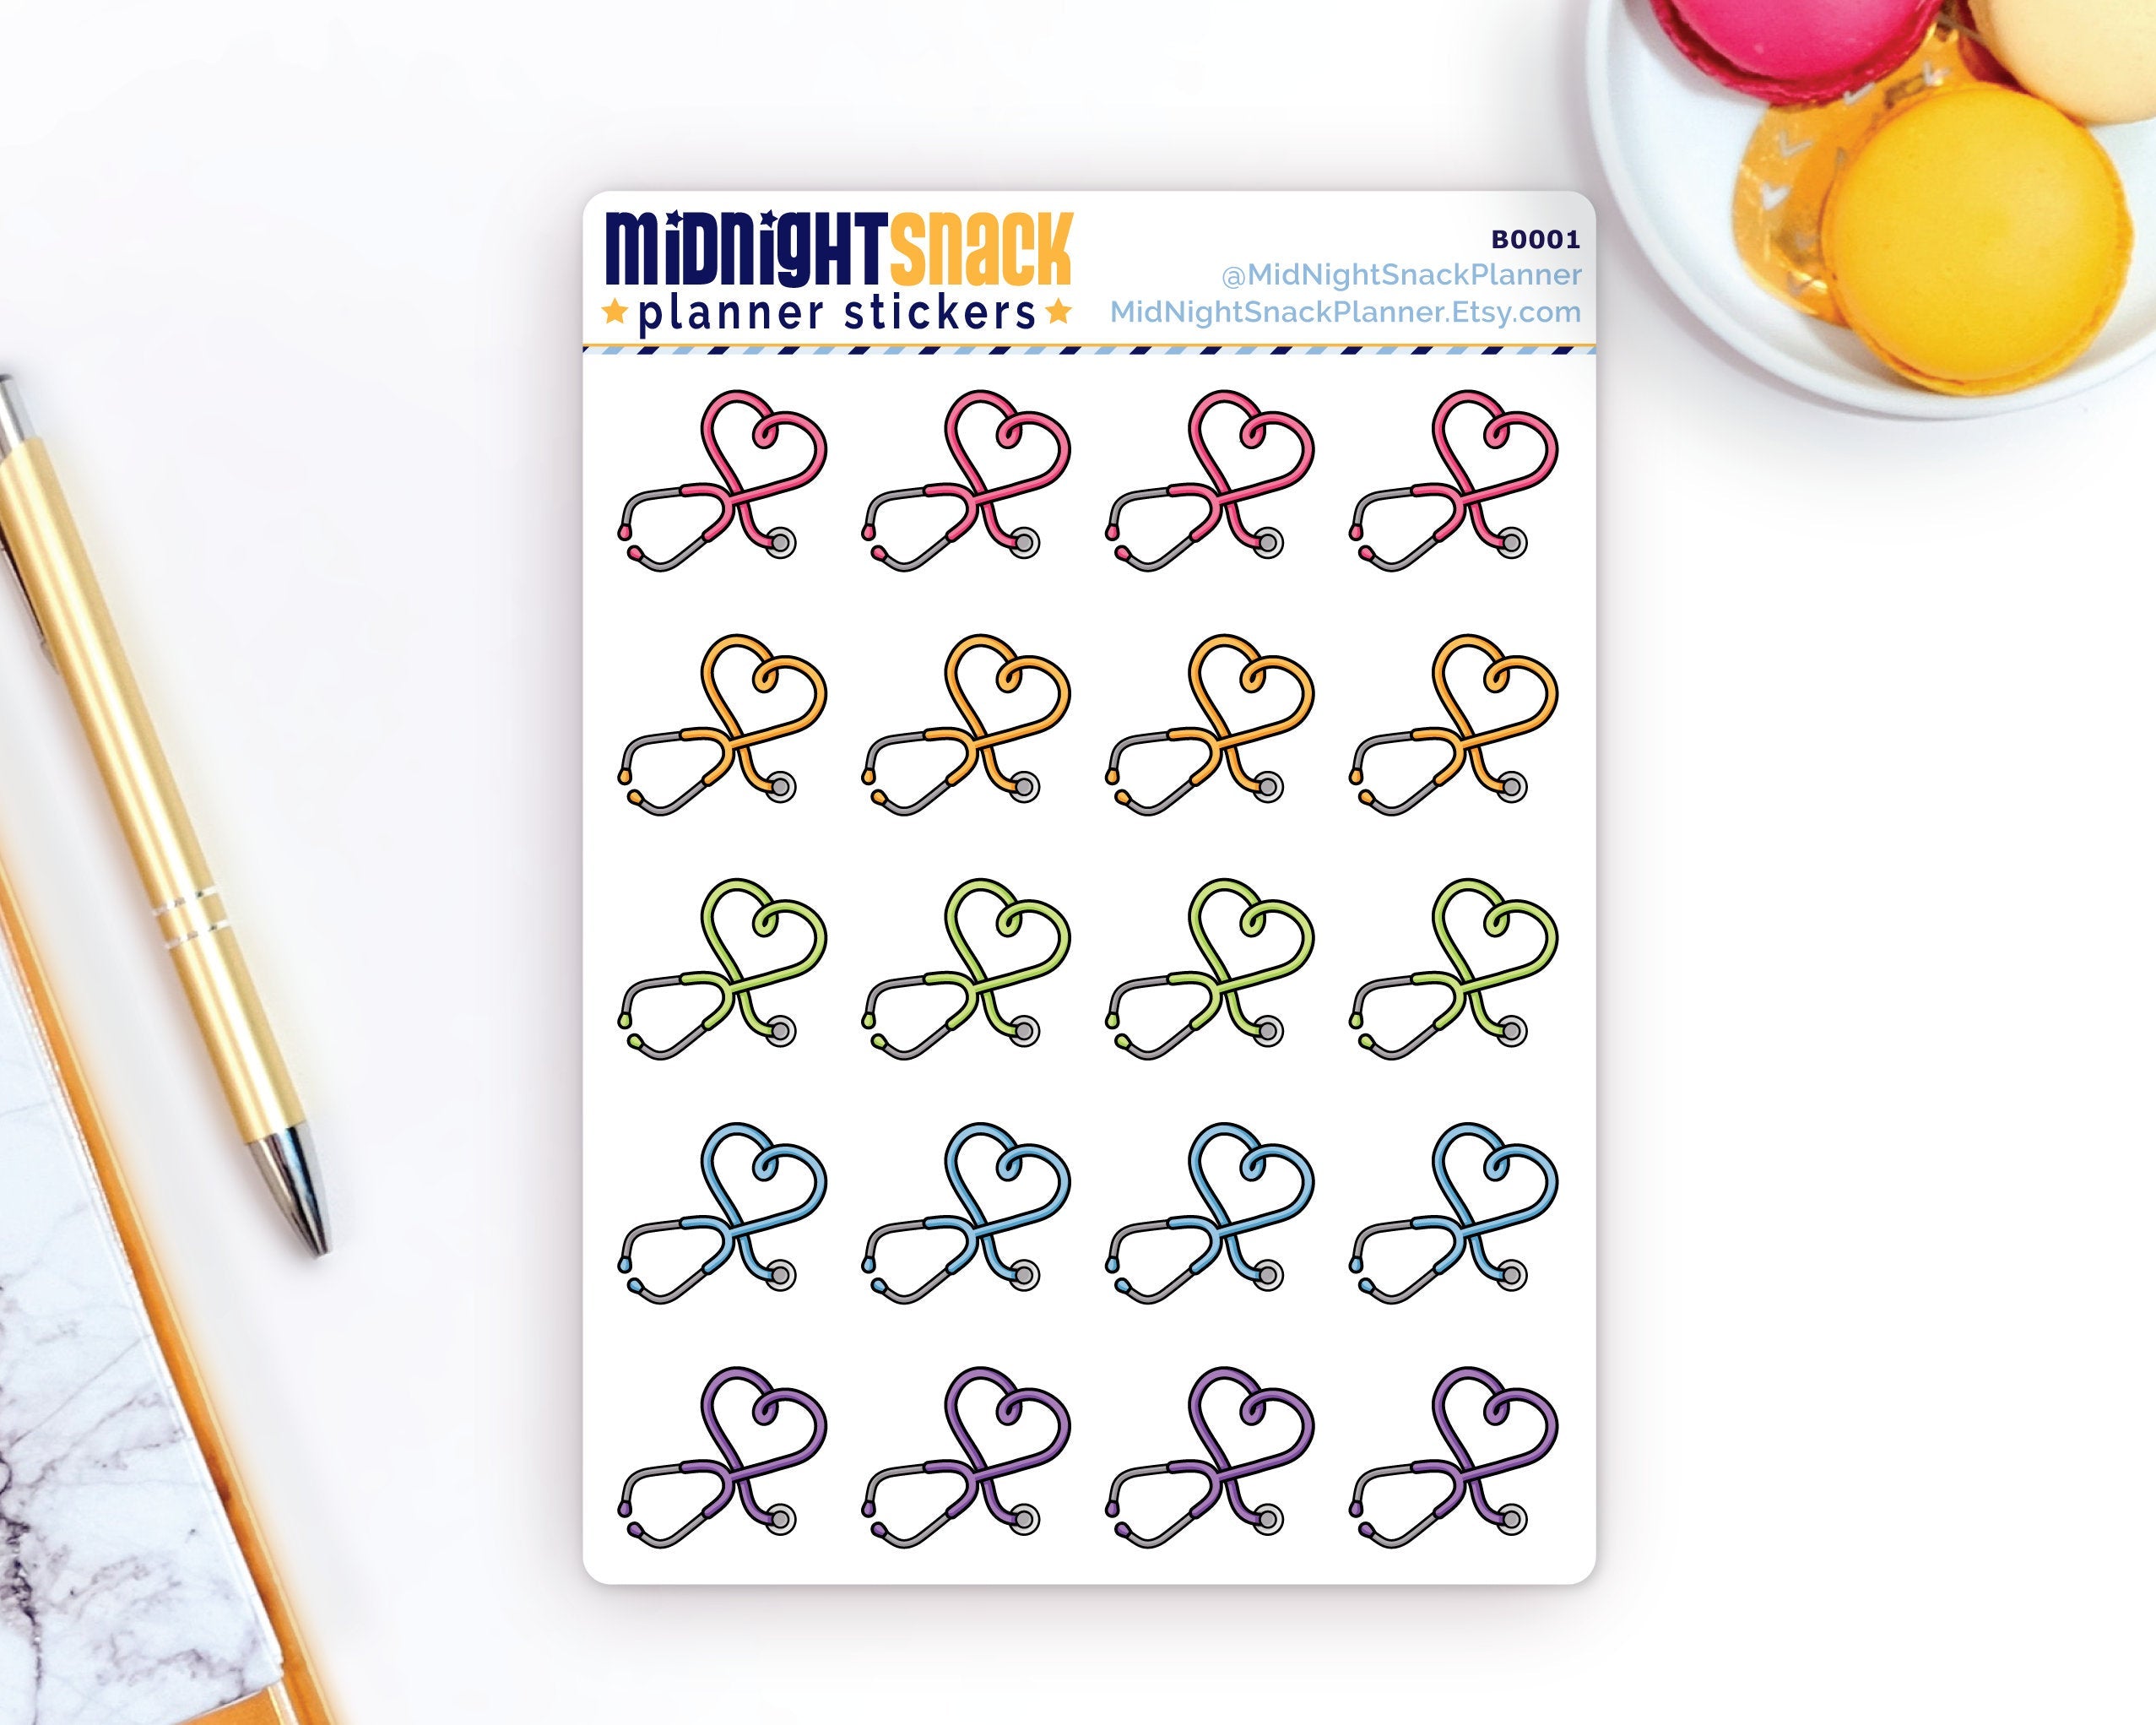 Stethoscope Icon: Doctor Appointment Reminder Planner Stickers Midnight Snack Planner